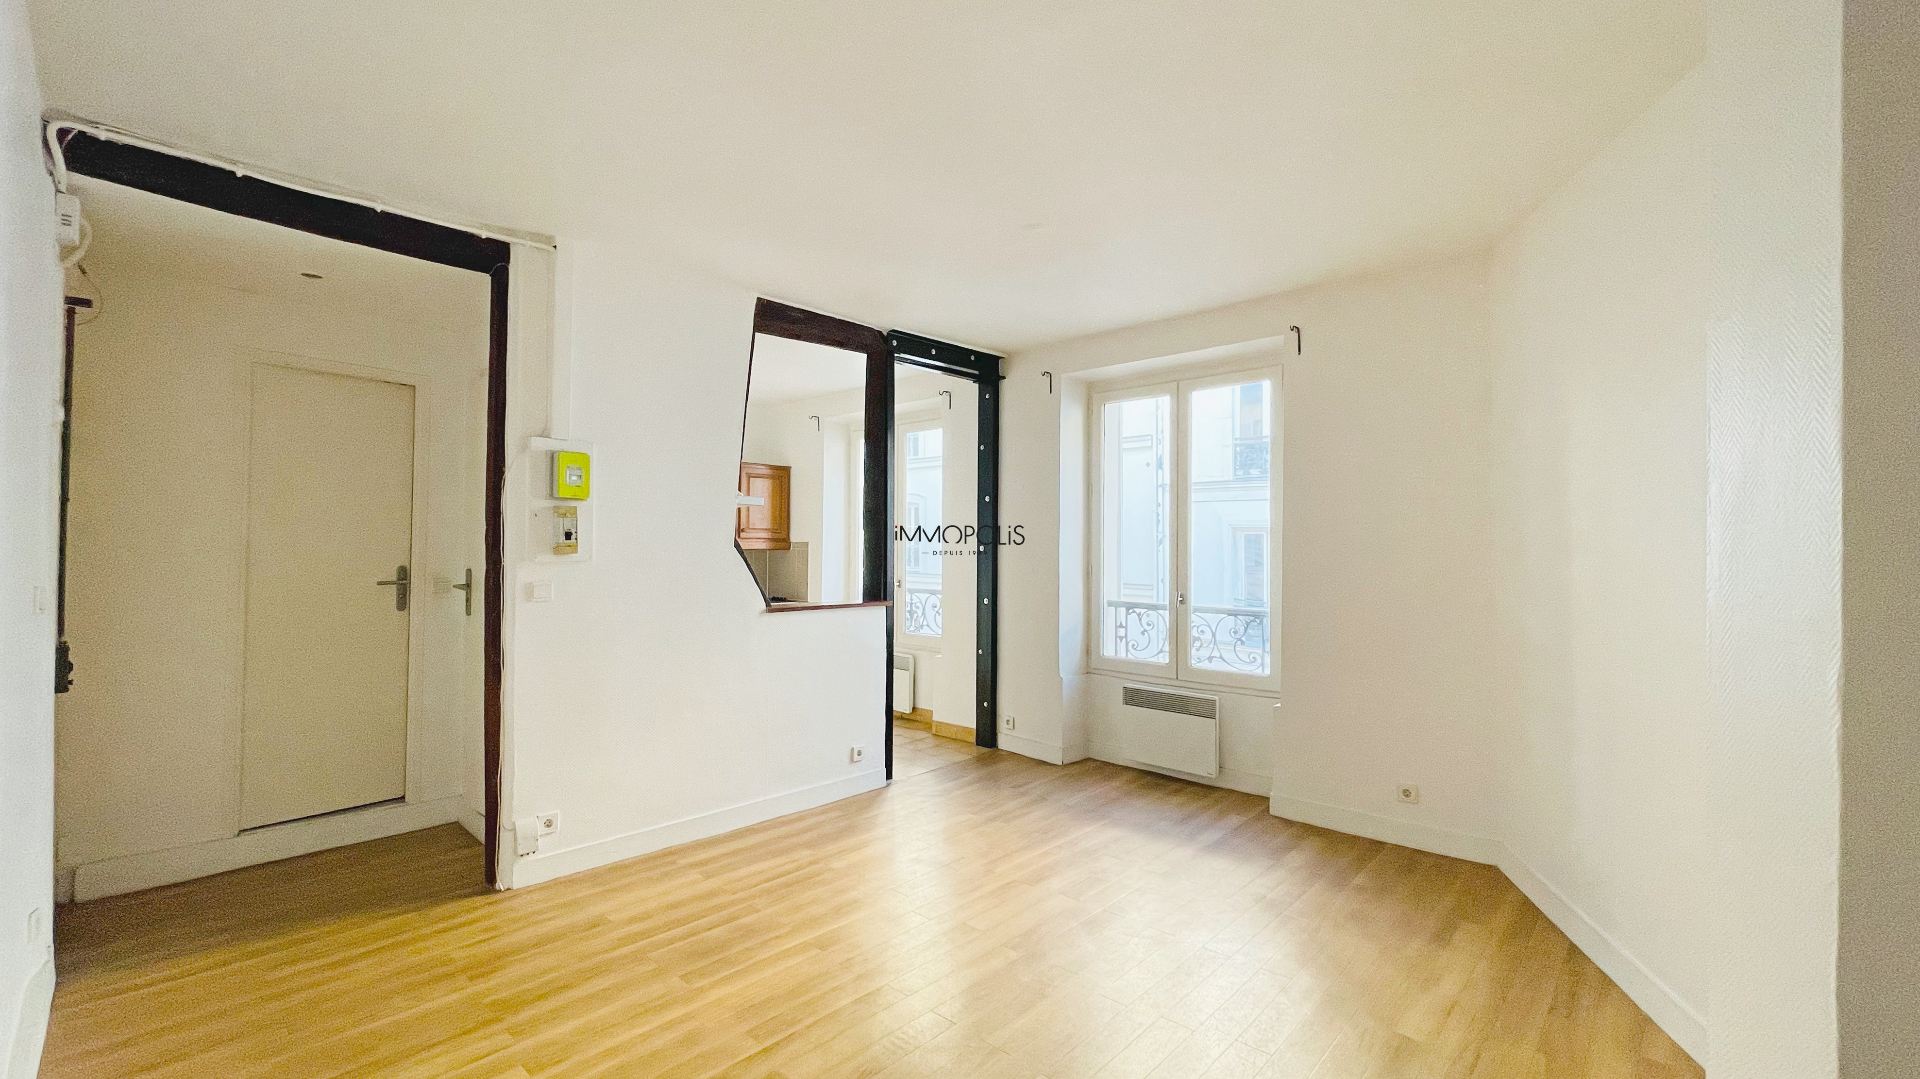 Beautiful studio in Montmartre, 30 m² without loss located in a building in perfect condition! 1